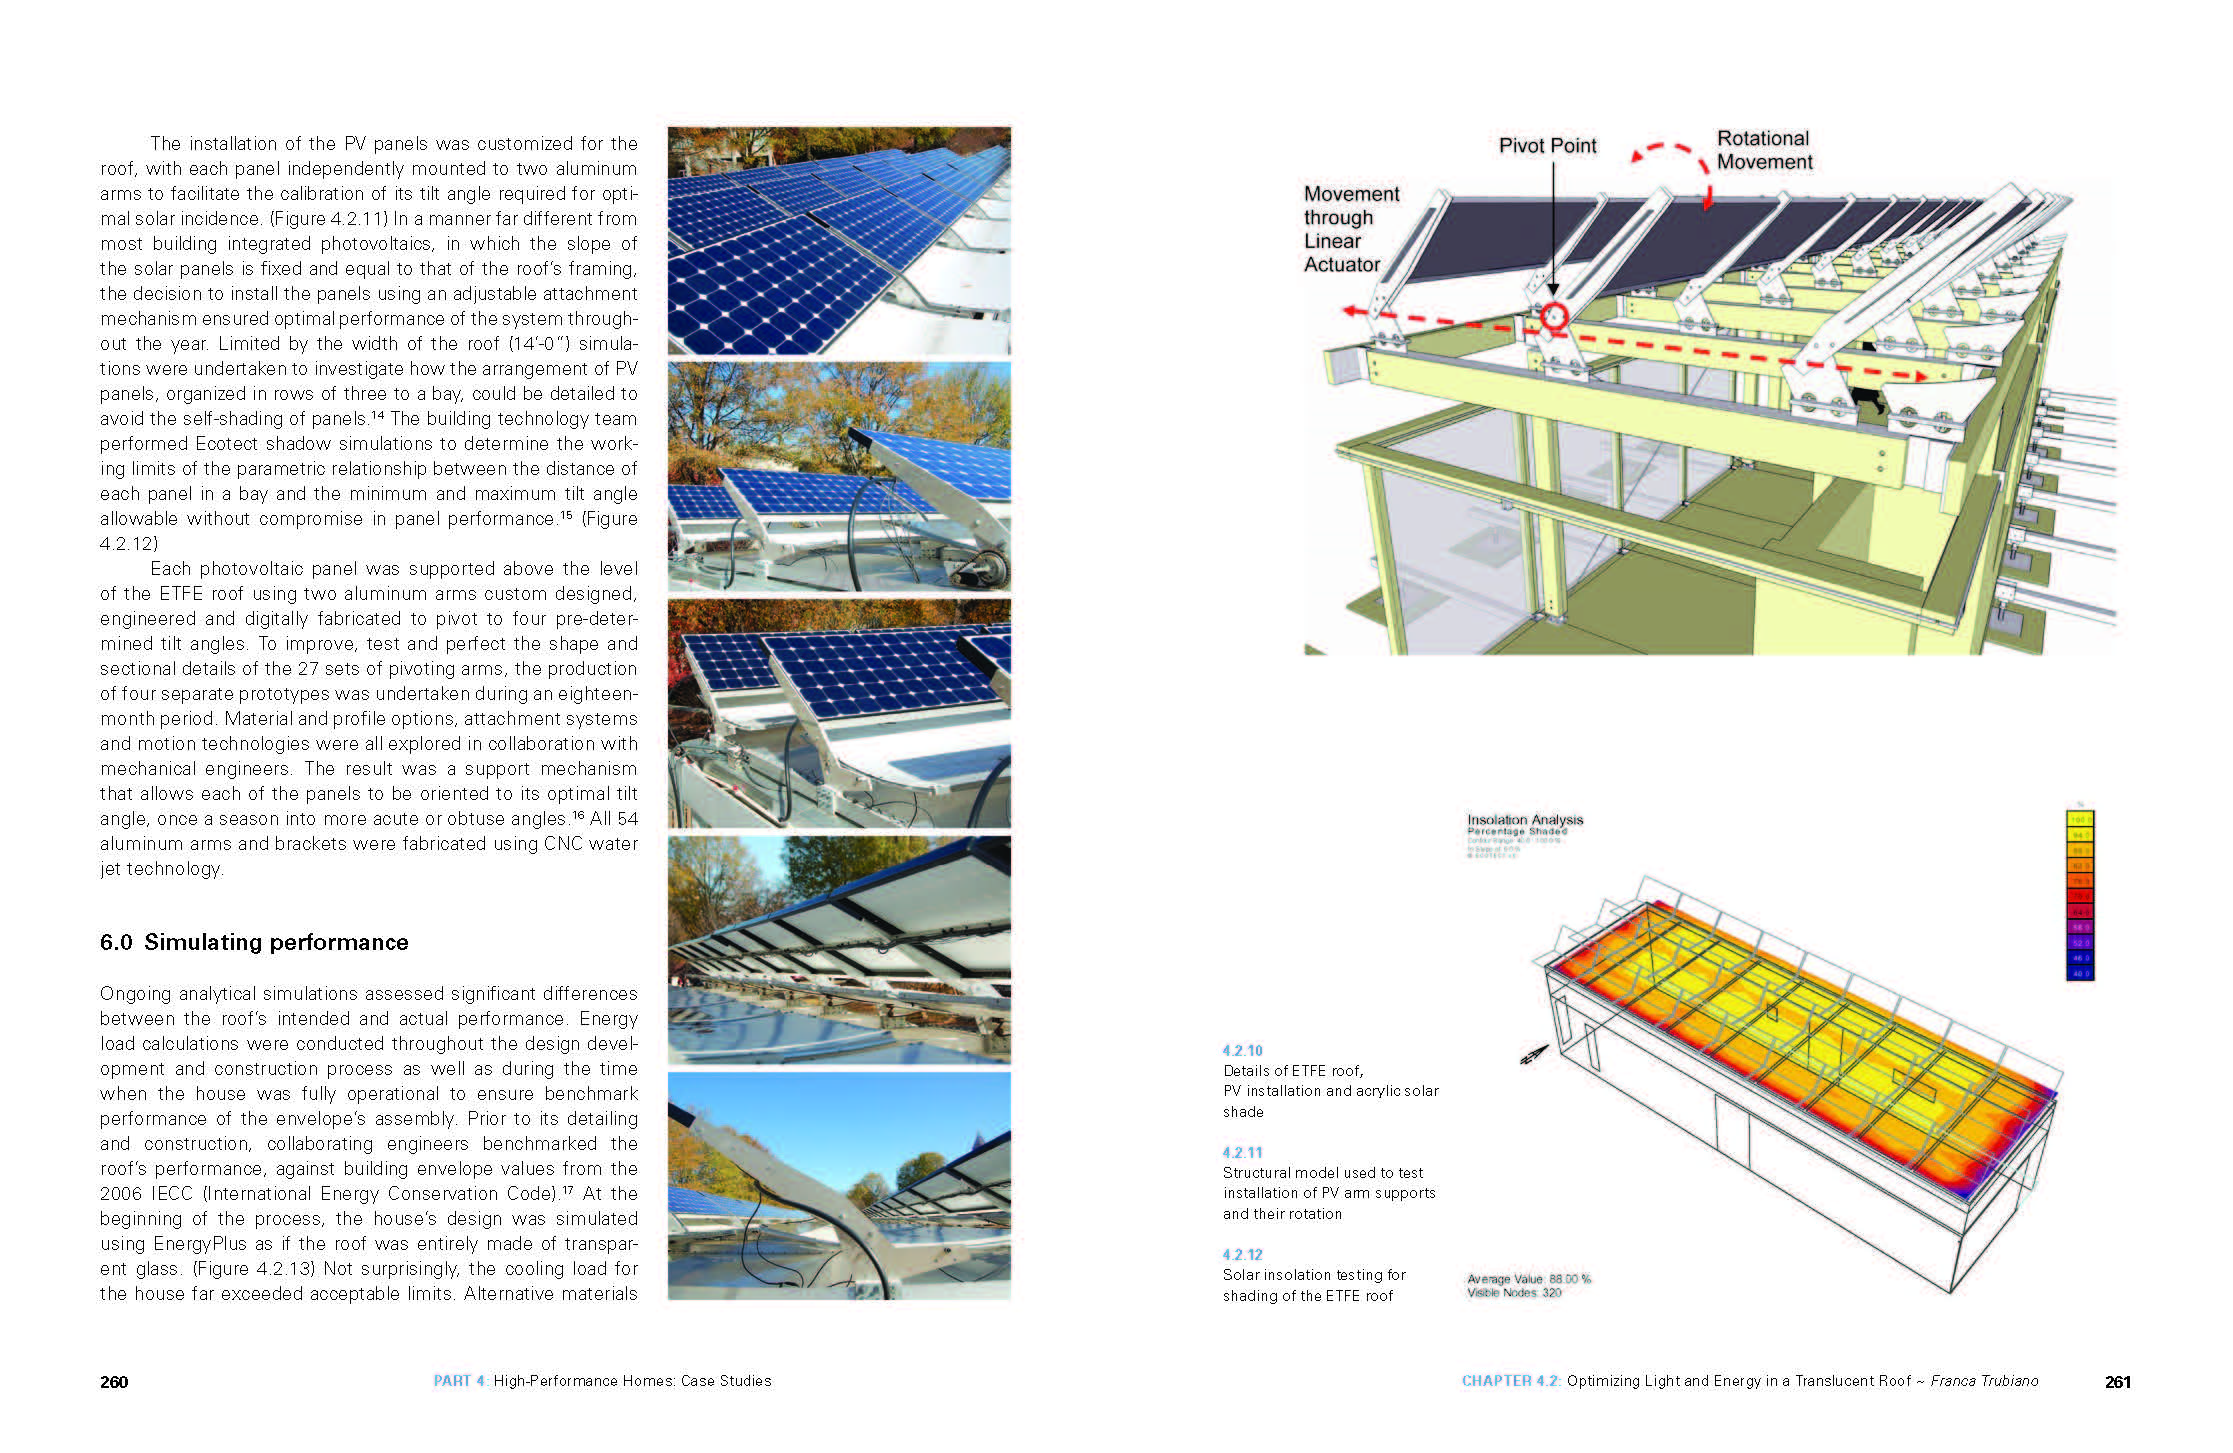 Pages from Revises 'Design and Construction of High-Performance Homes'.4 .jpg